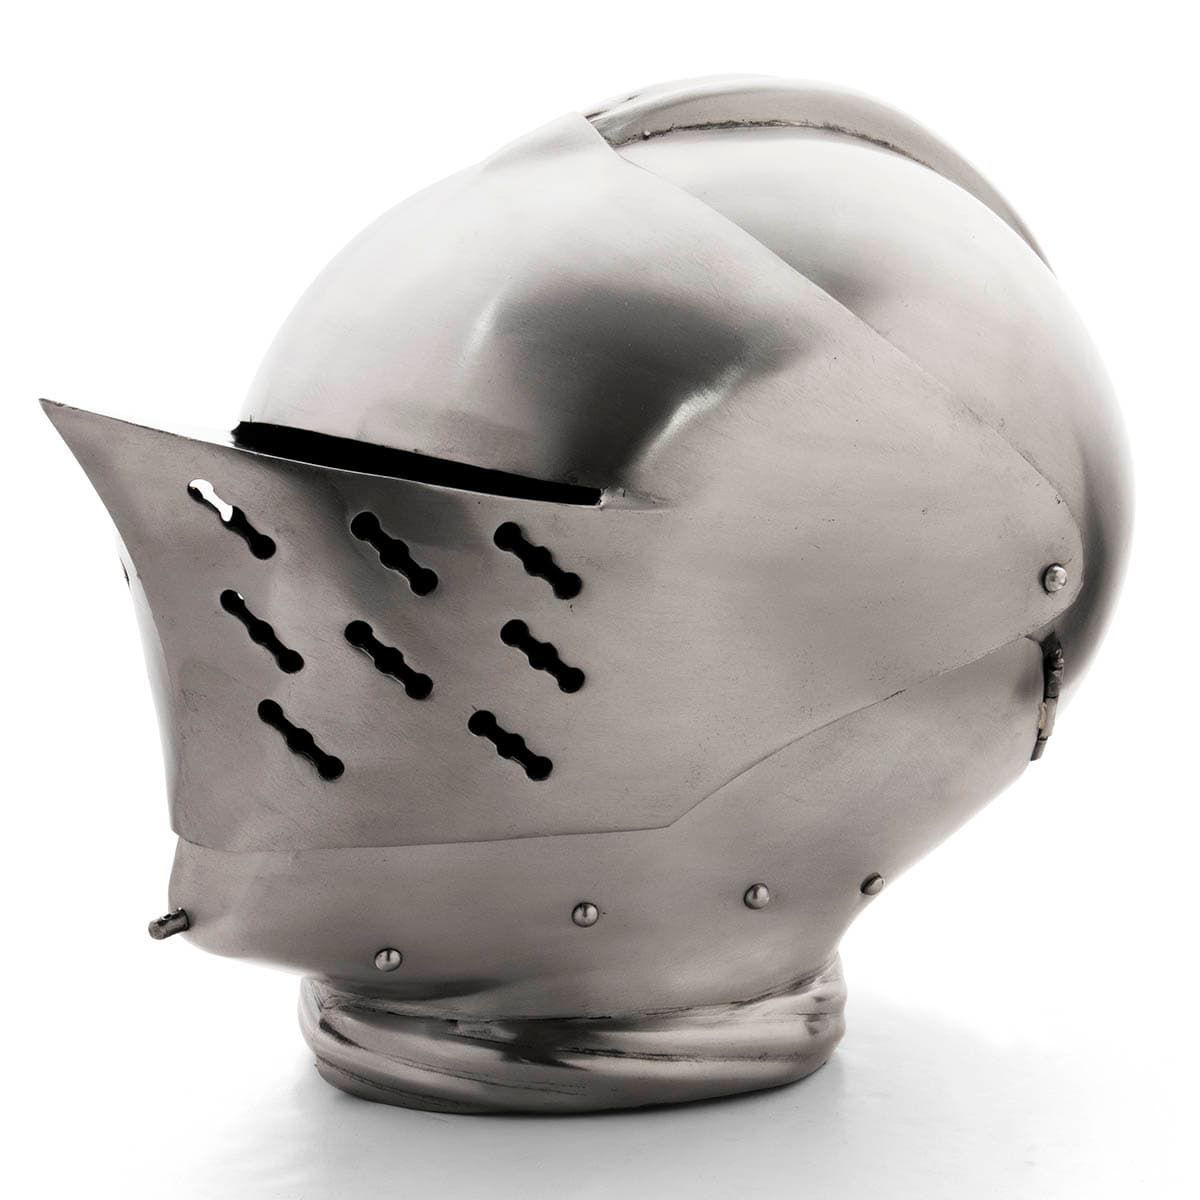 Tudor 16th Century Armet Renaissance Helmet is 18 gauge steel, wearable with hinged visor and chin plates and cotton liner